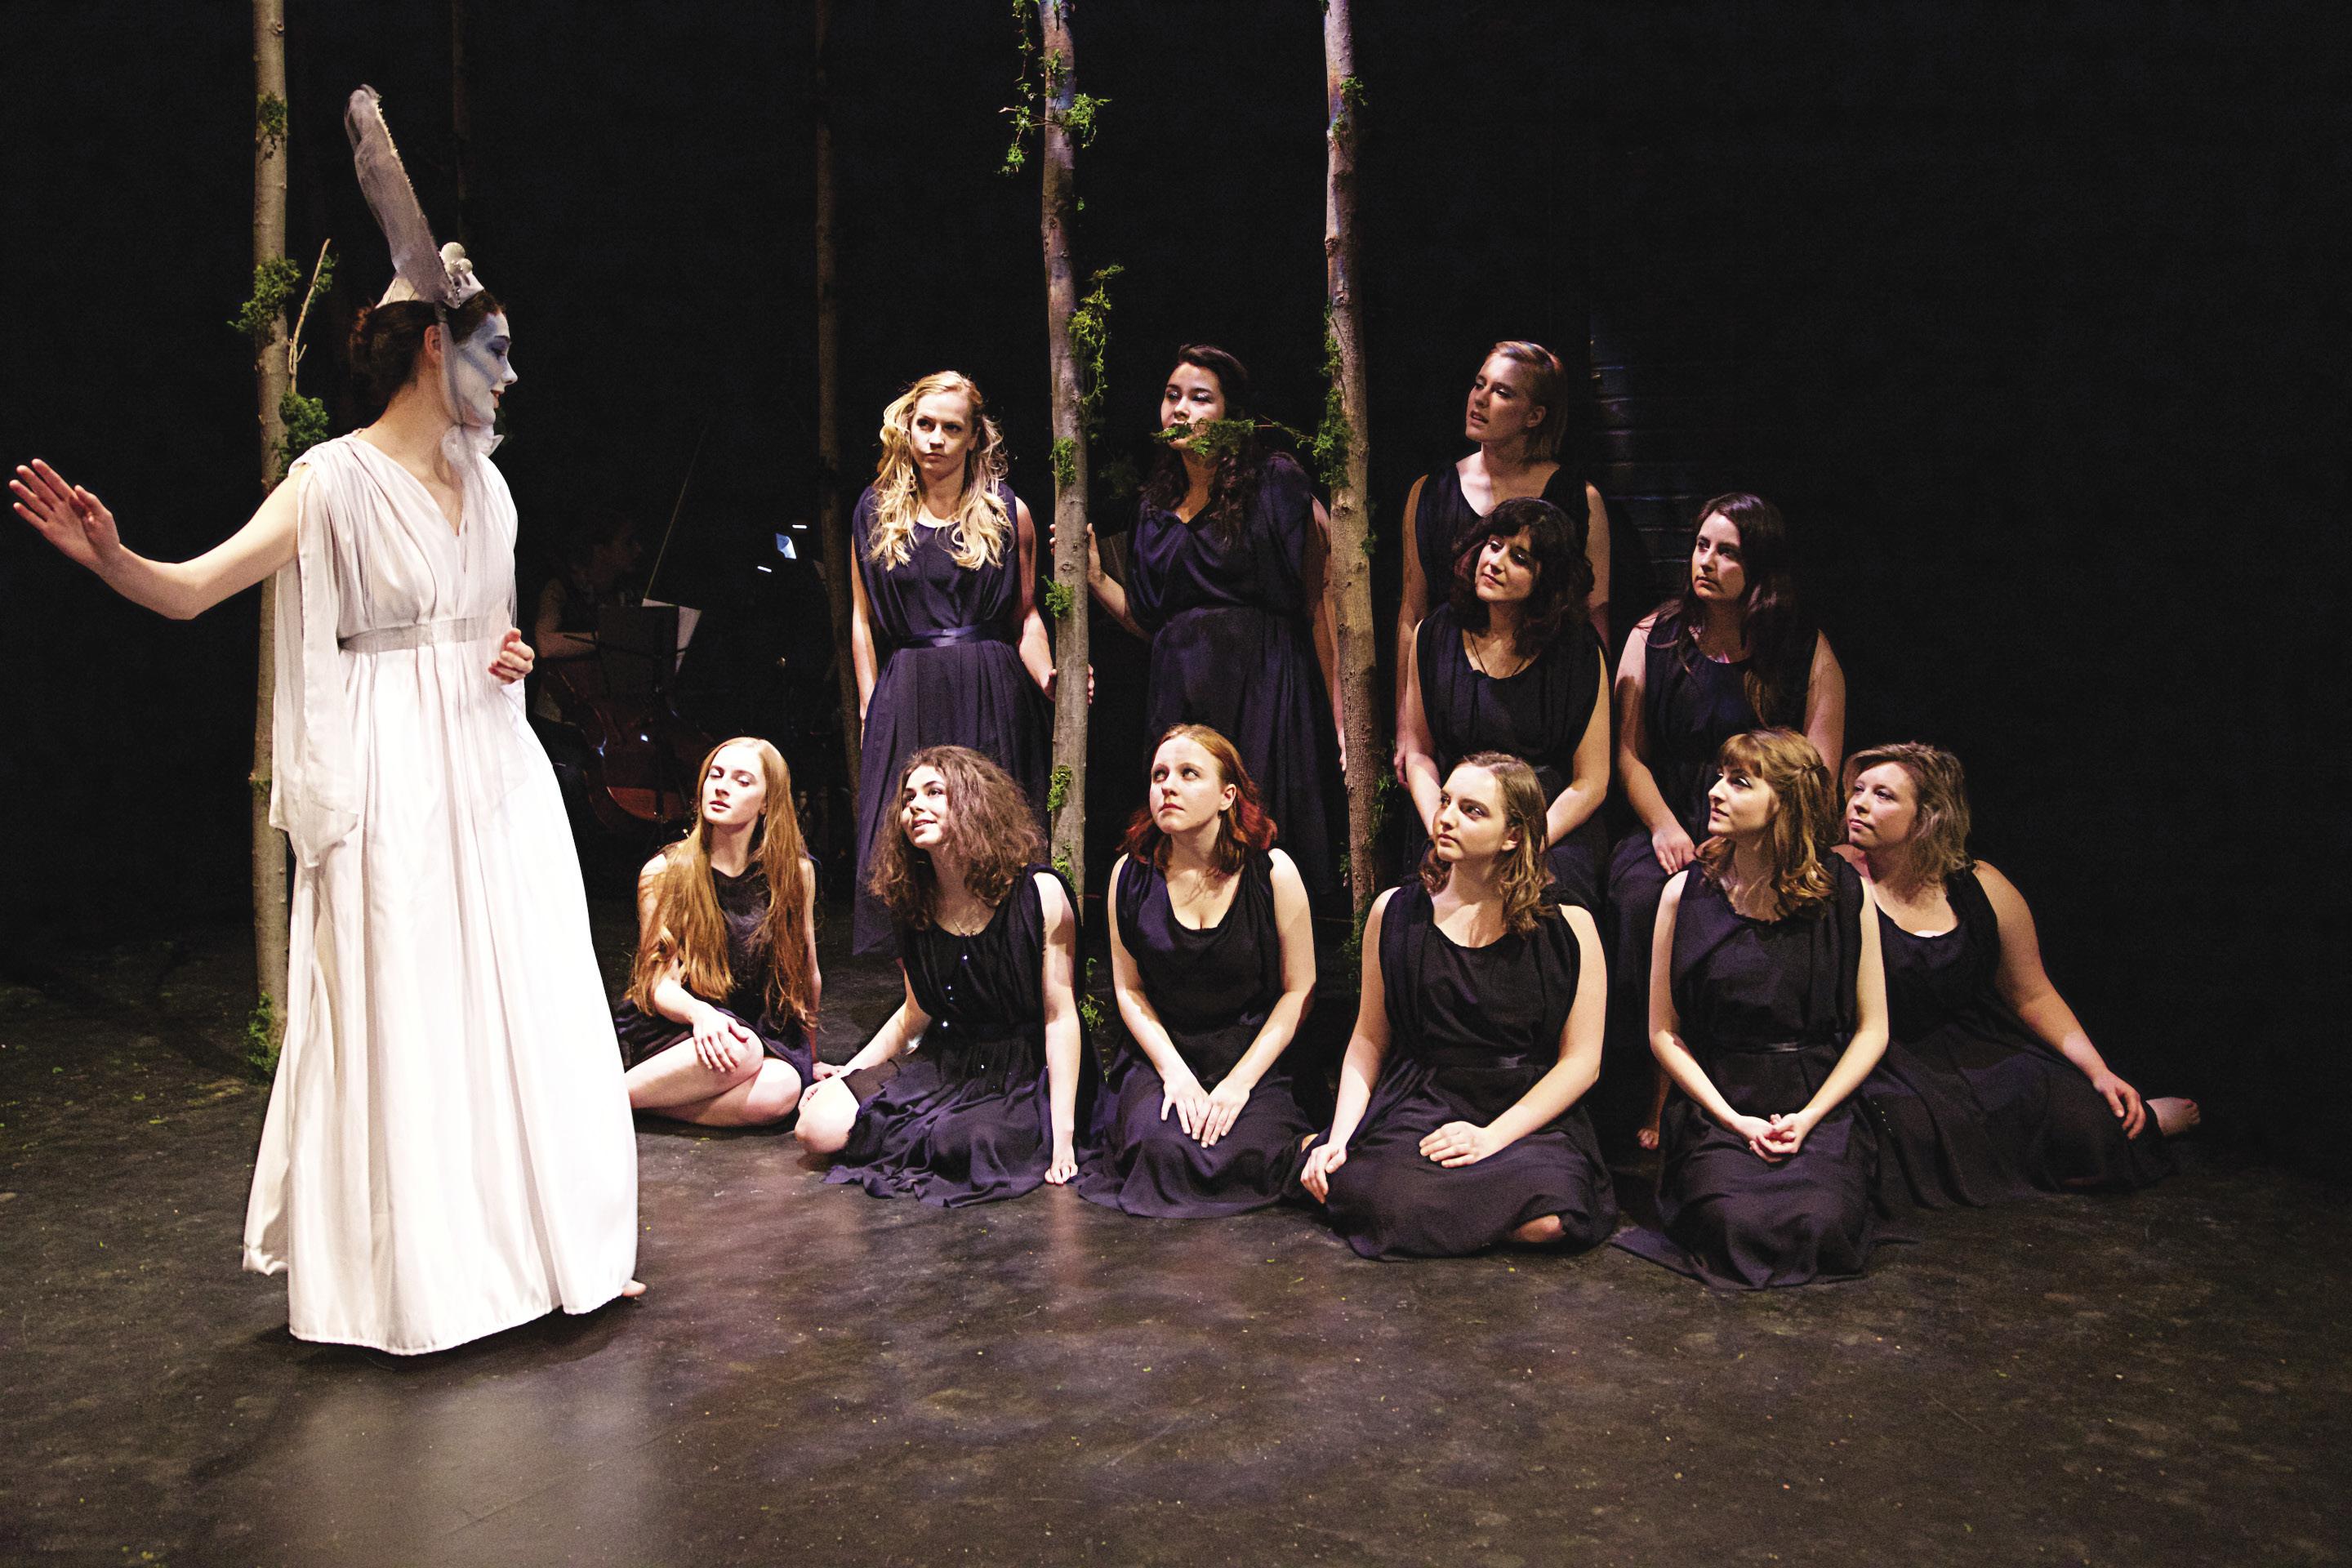 A woman in white walks past a group of women in black, kneeling on a stage